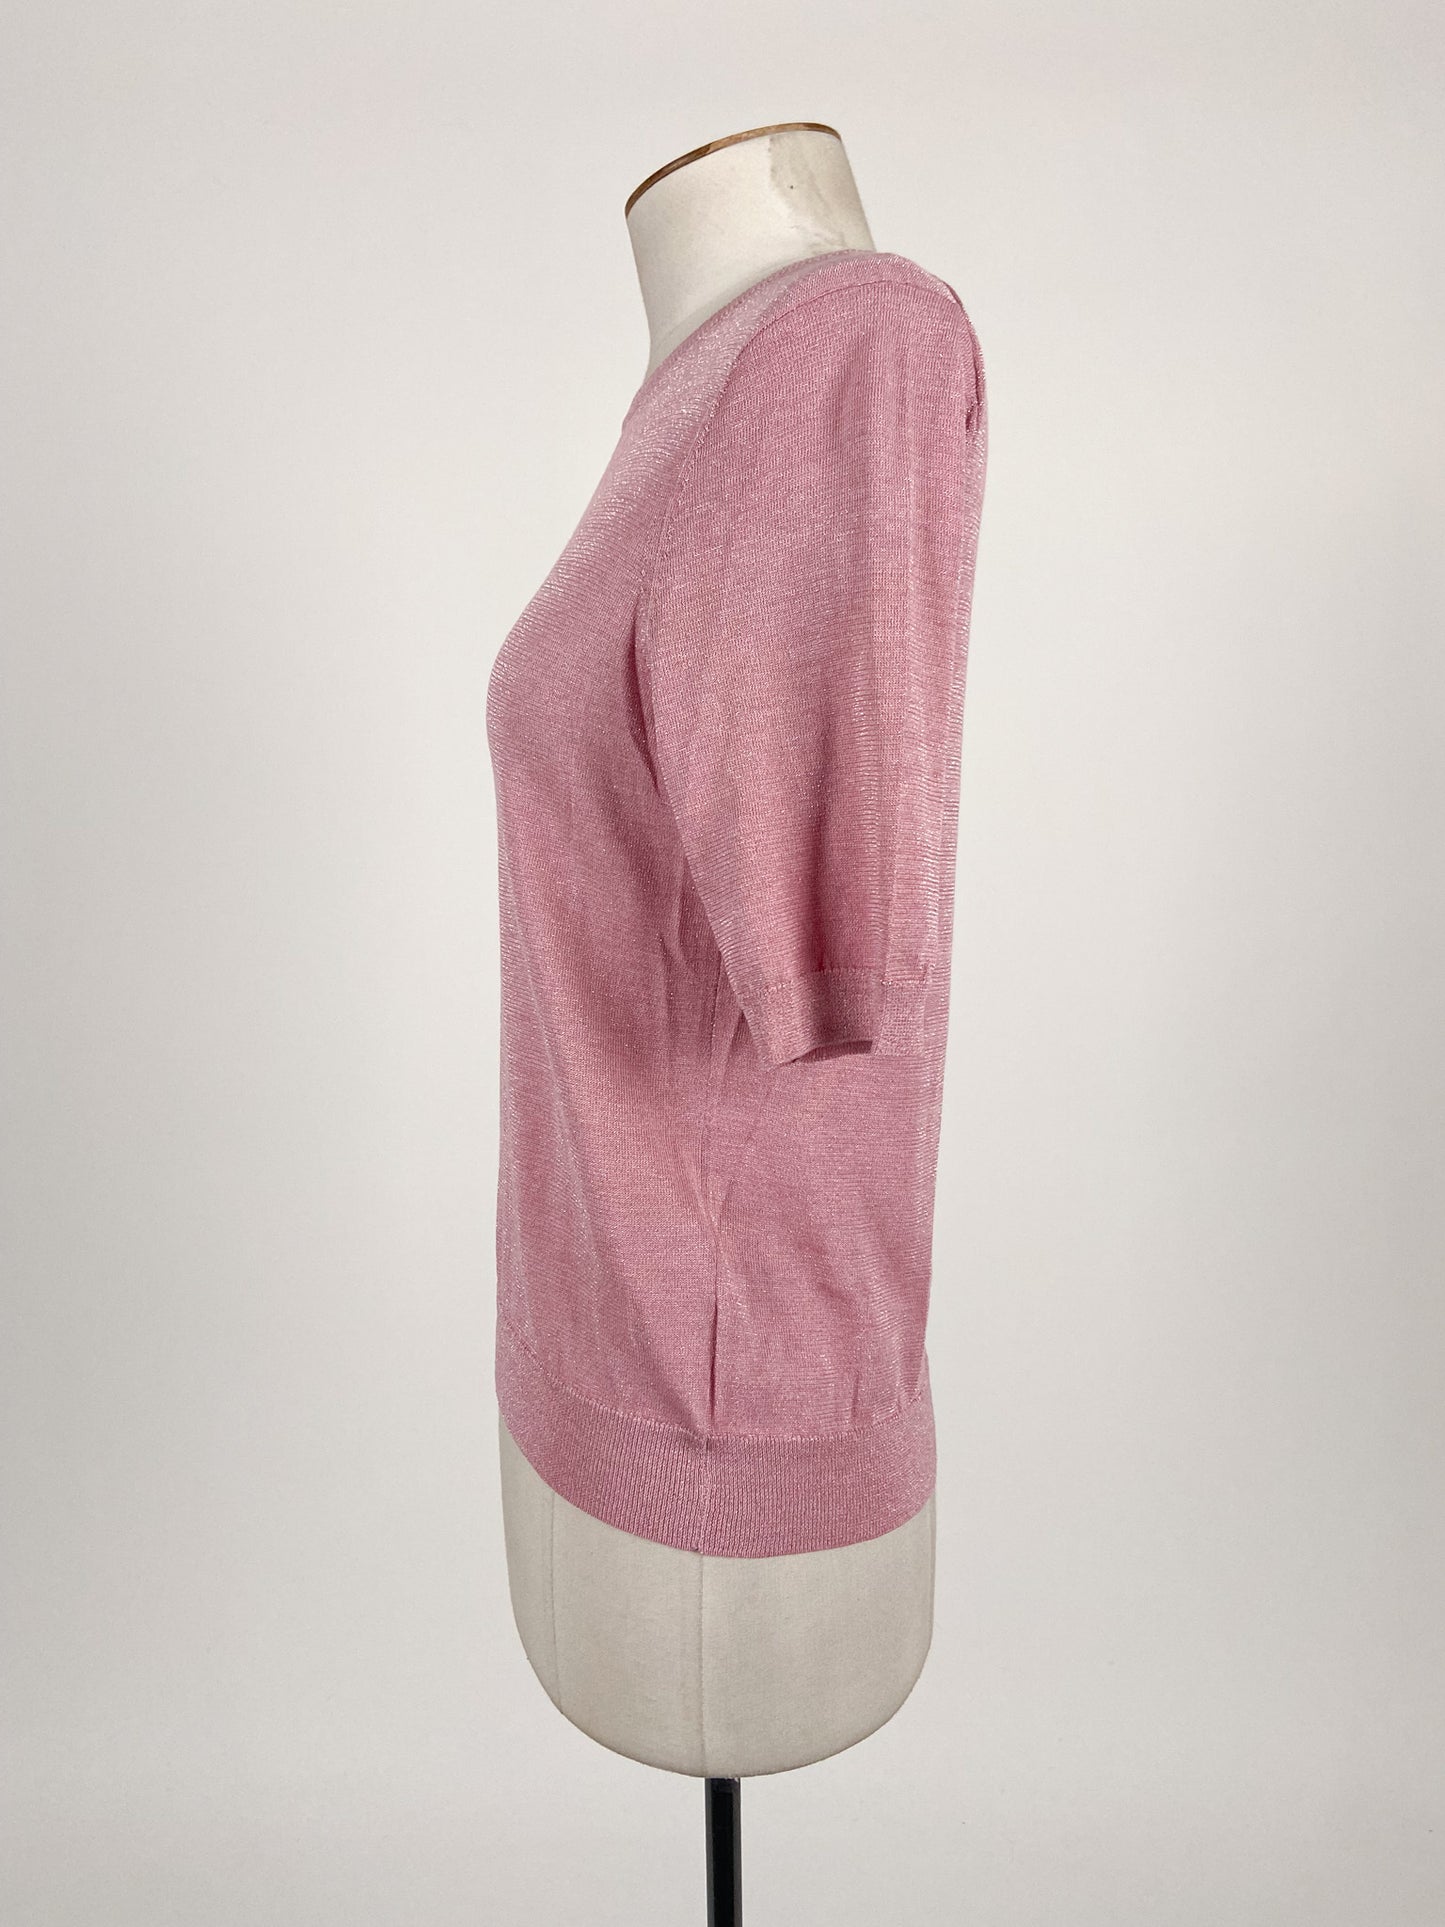 Anna Thomas | Pink Casual/Workwear Top | Size S